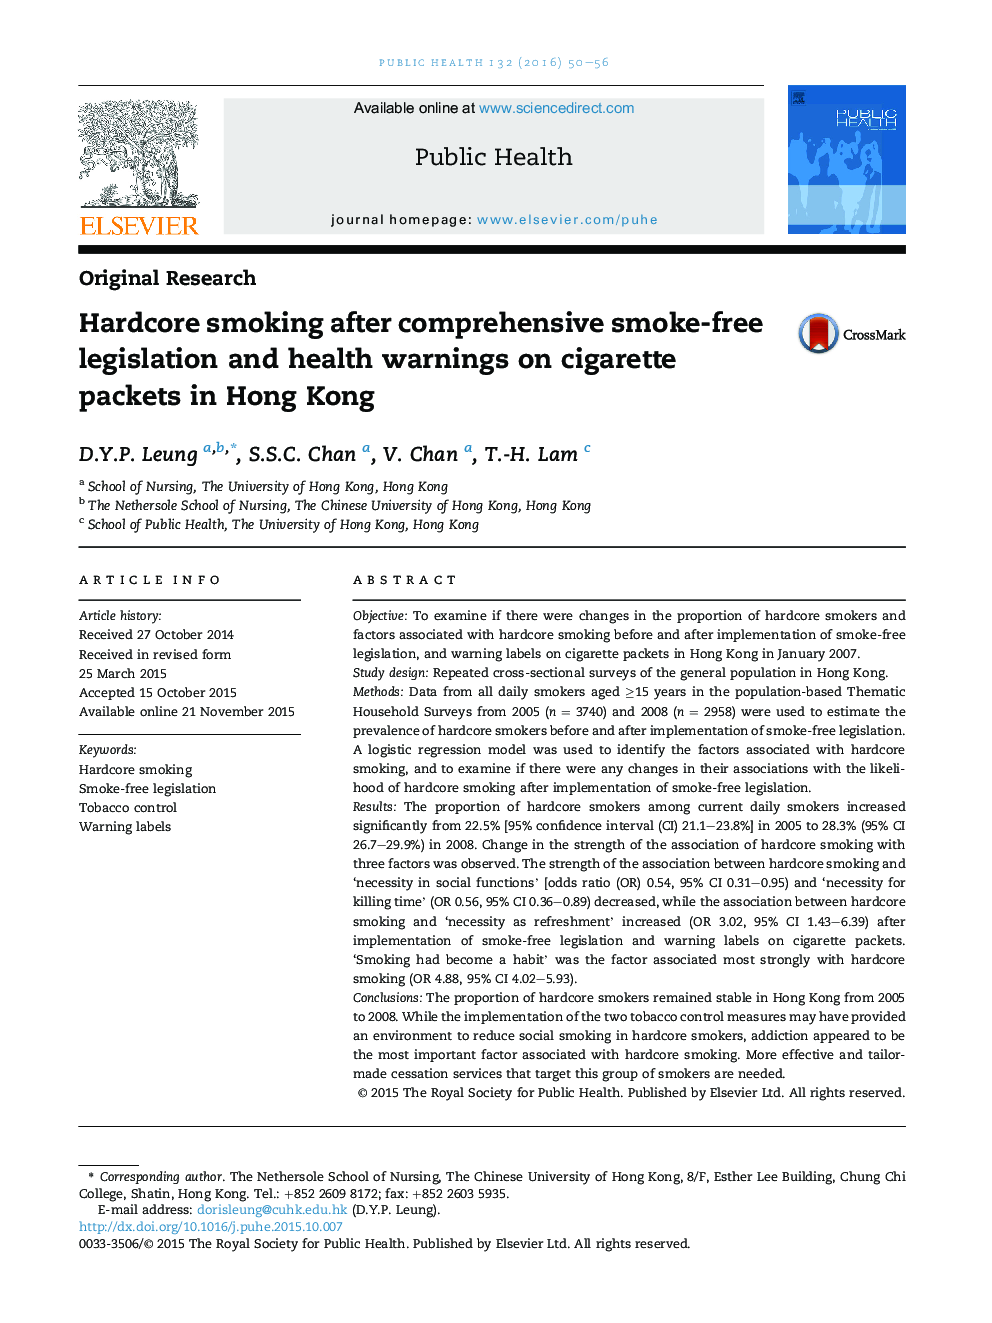 Hardcore smoking after comprehensive smoke-free legislation and health warnings on cigarette packets in Hong Kong